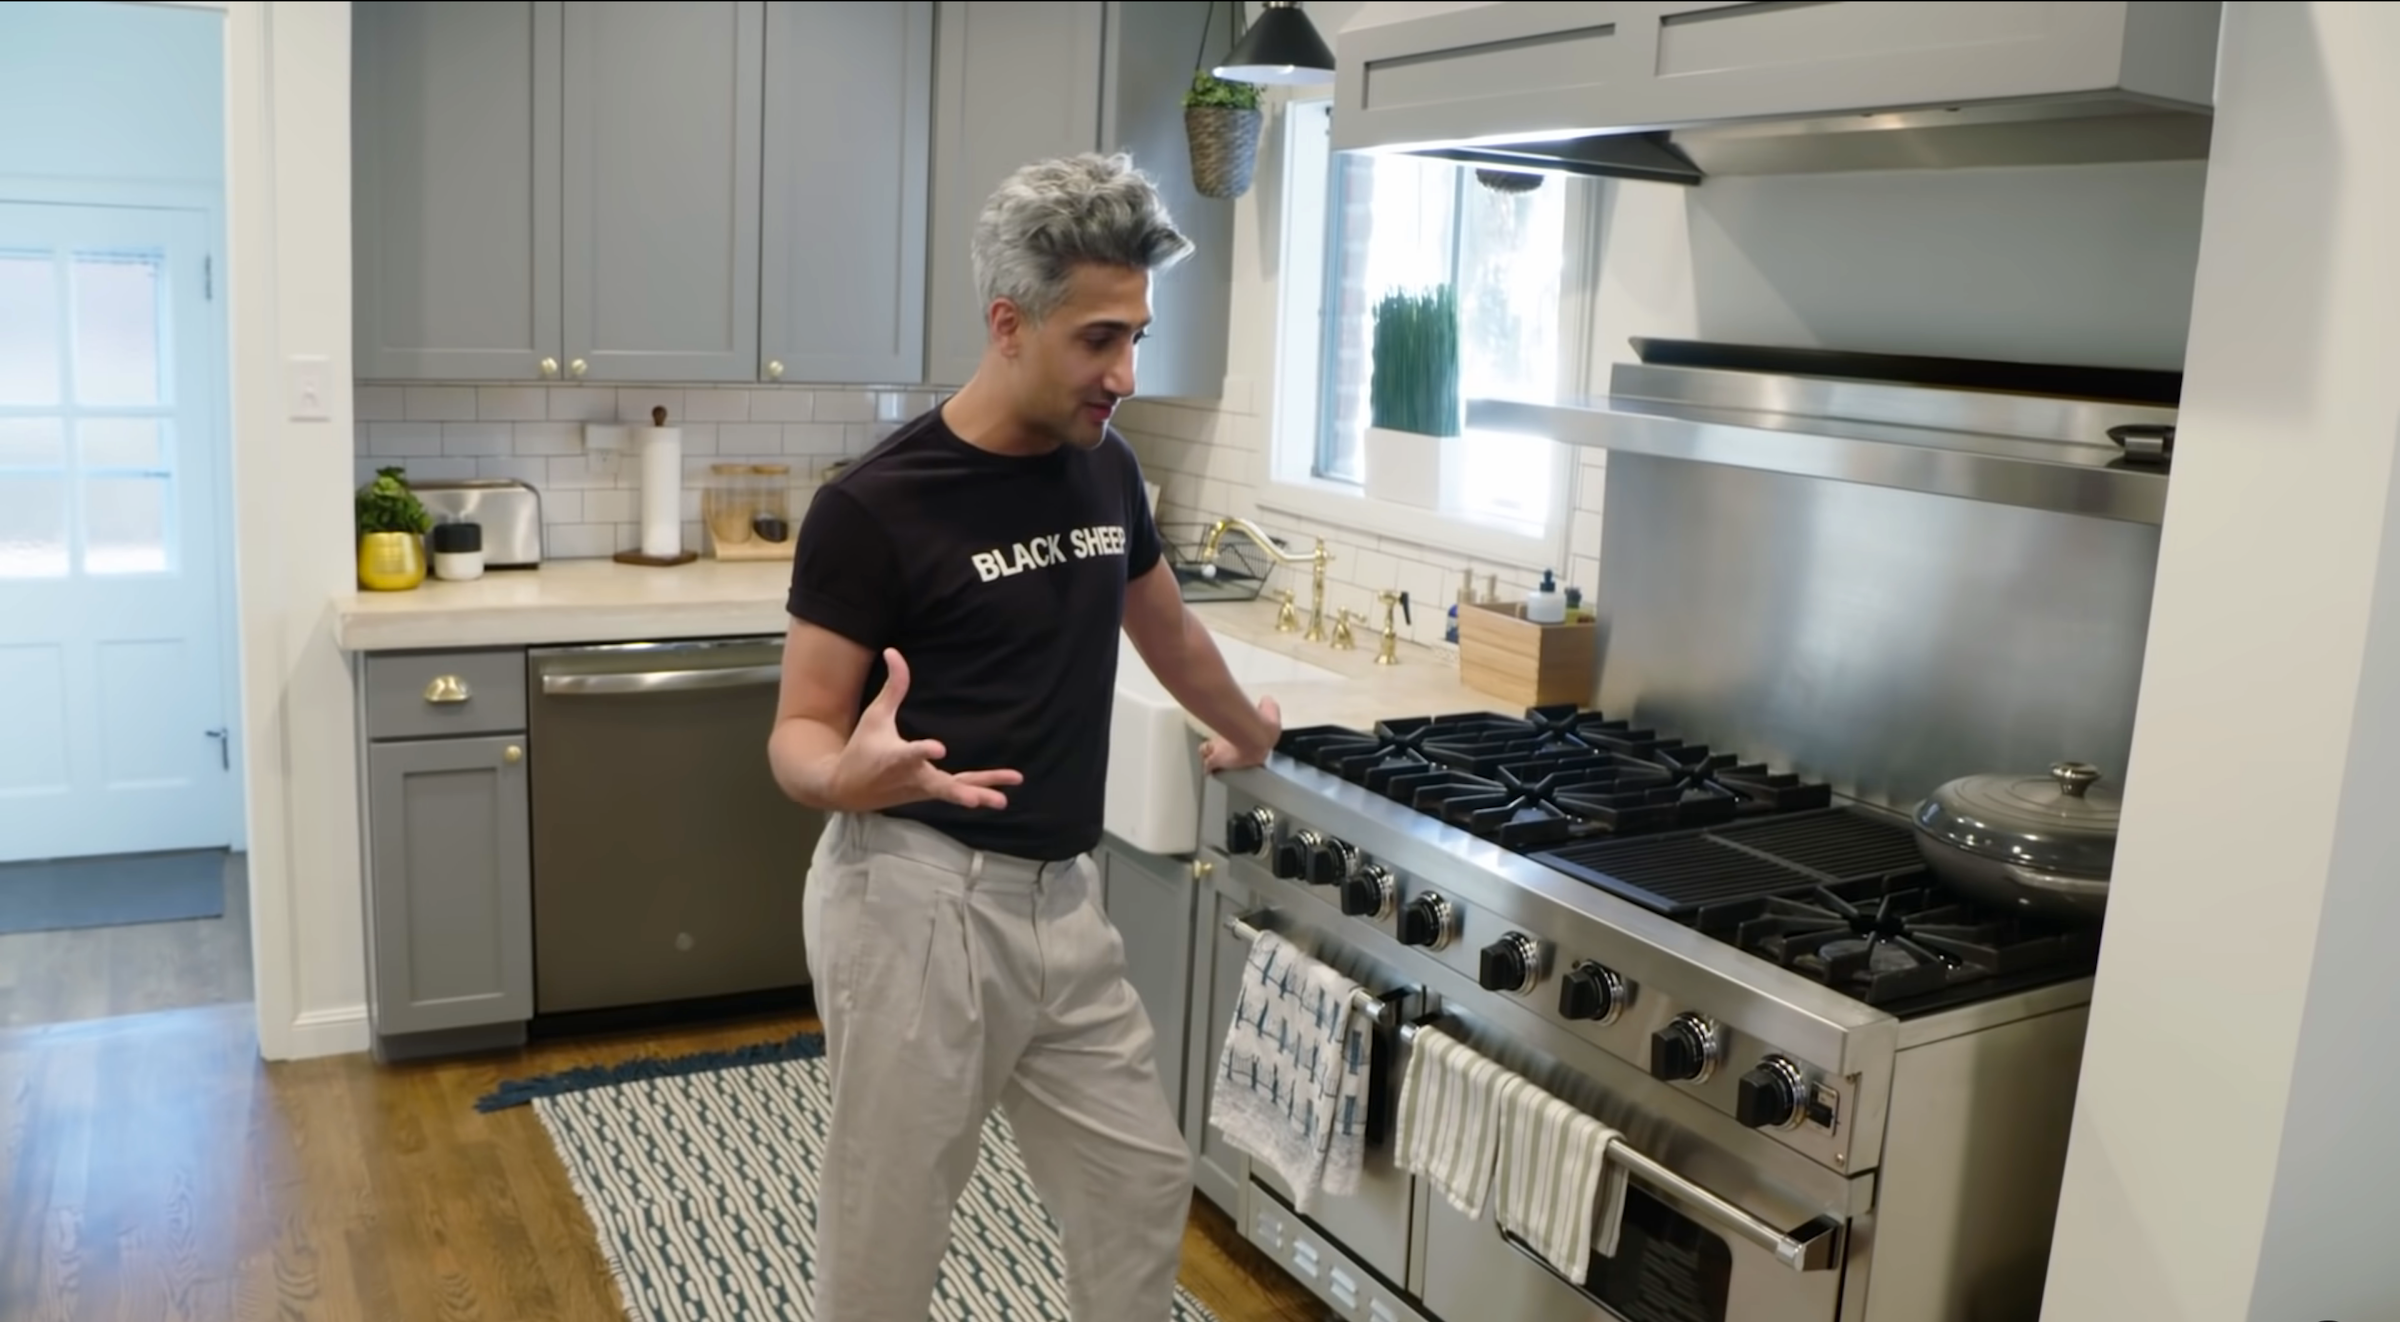 Tan in his kitchen